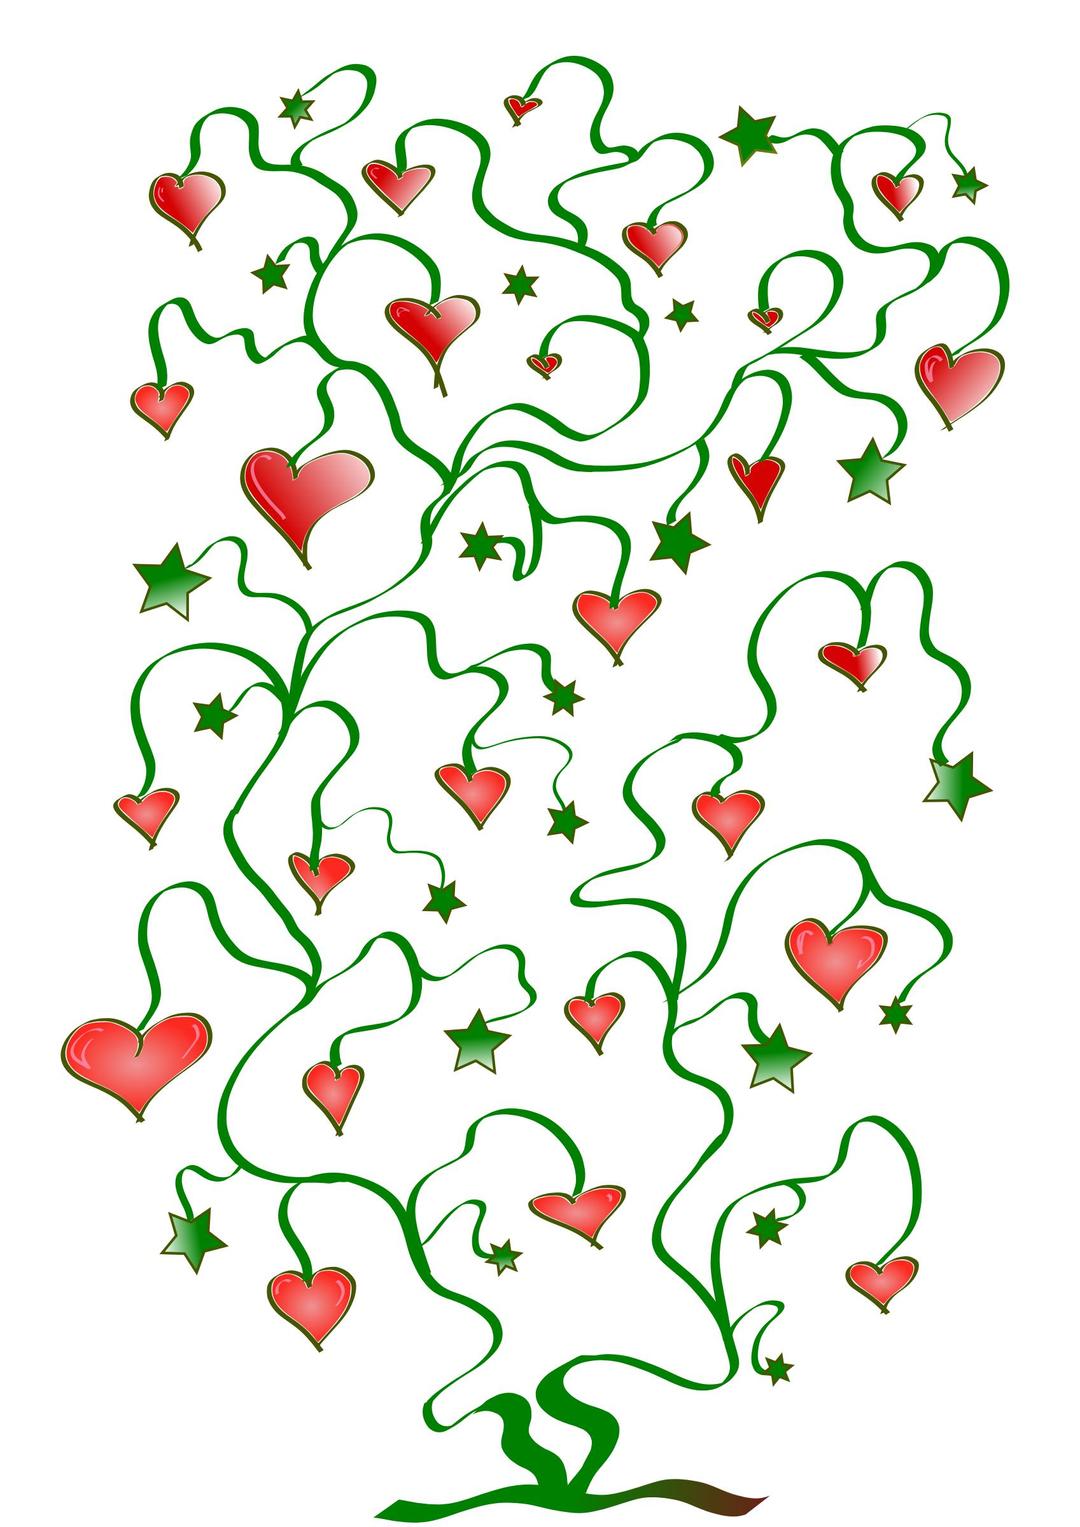 Tree of Hearts with Leaves of Stars png transparent